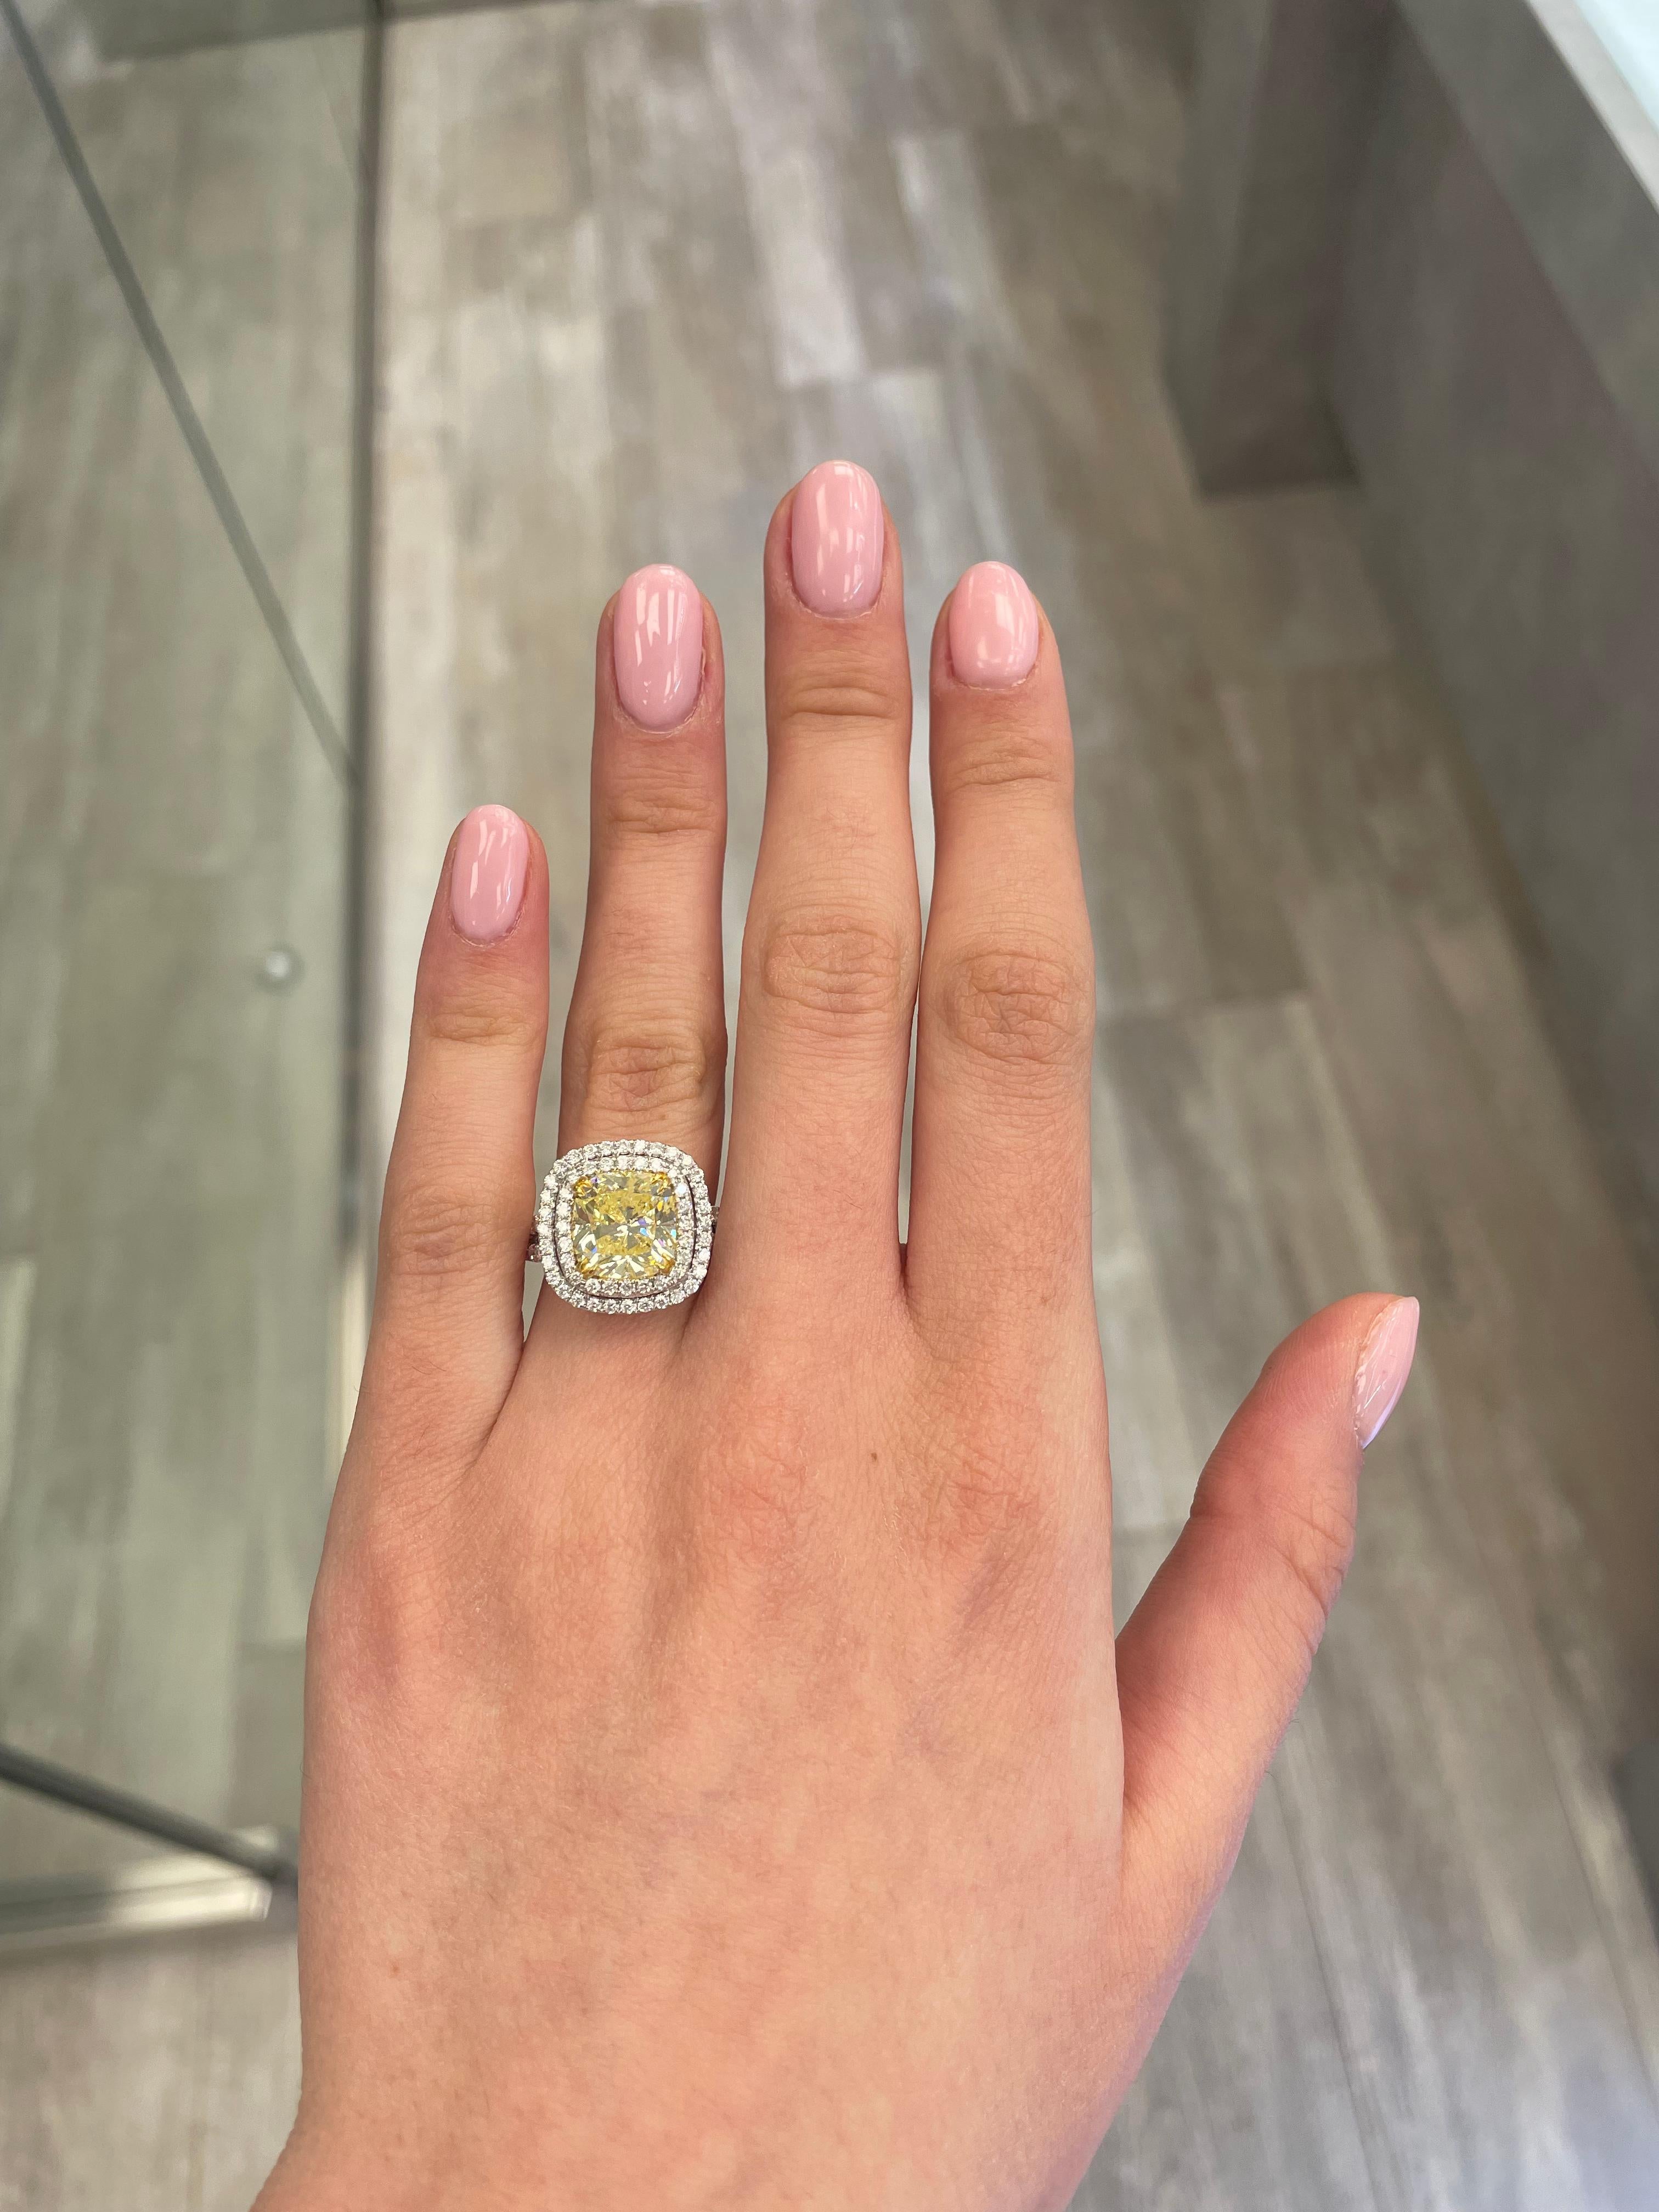 Stunning modern EGL certified fancy yellow fancy yellow diamond with double diamond halo ring, two-tone 18k white and yellow. 
High jewelry by Alexander Beverly Hills.
5.07 carats total diamond weight.
4.05 carat cushion Fancy Yellow Fancy Yellow